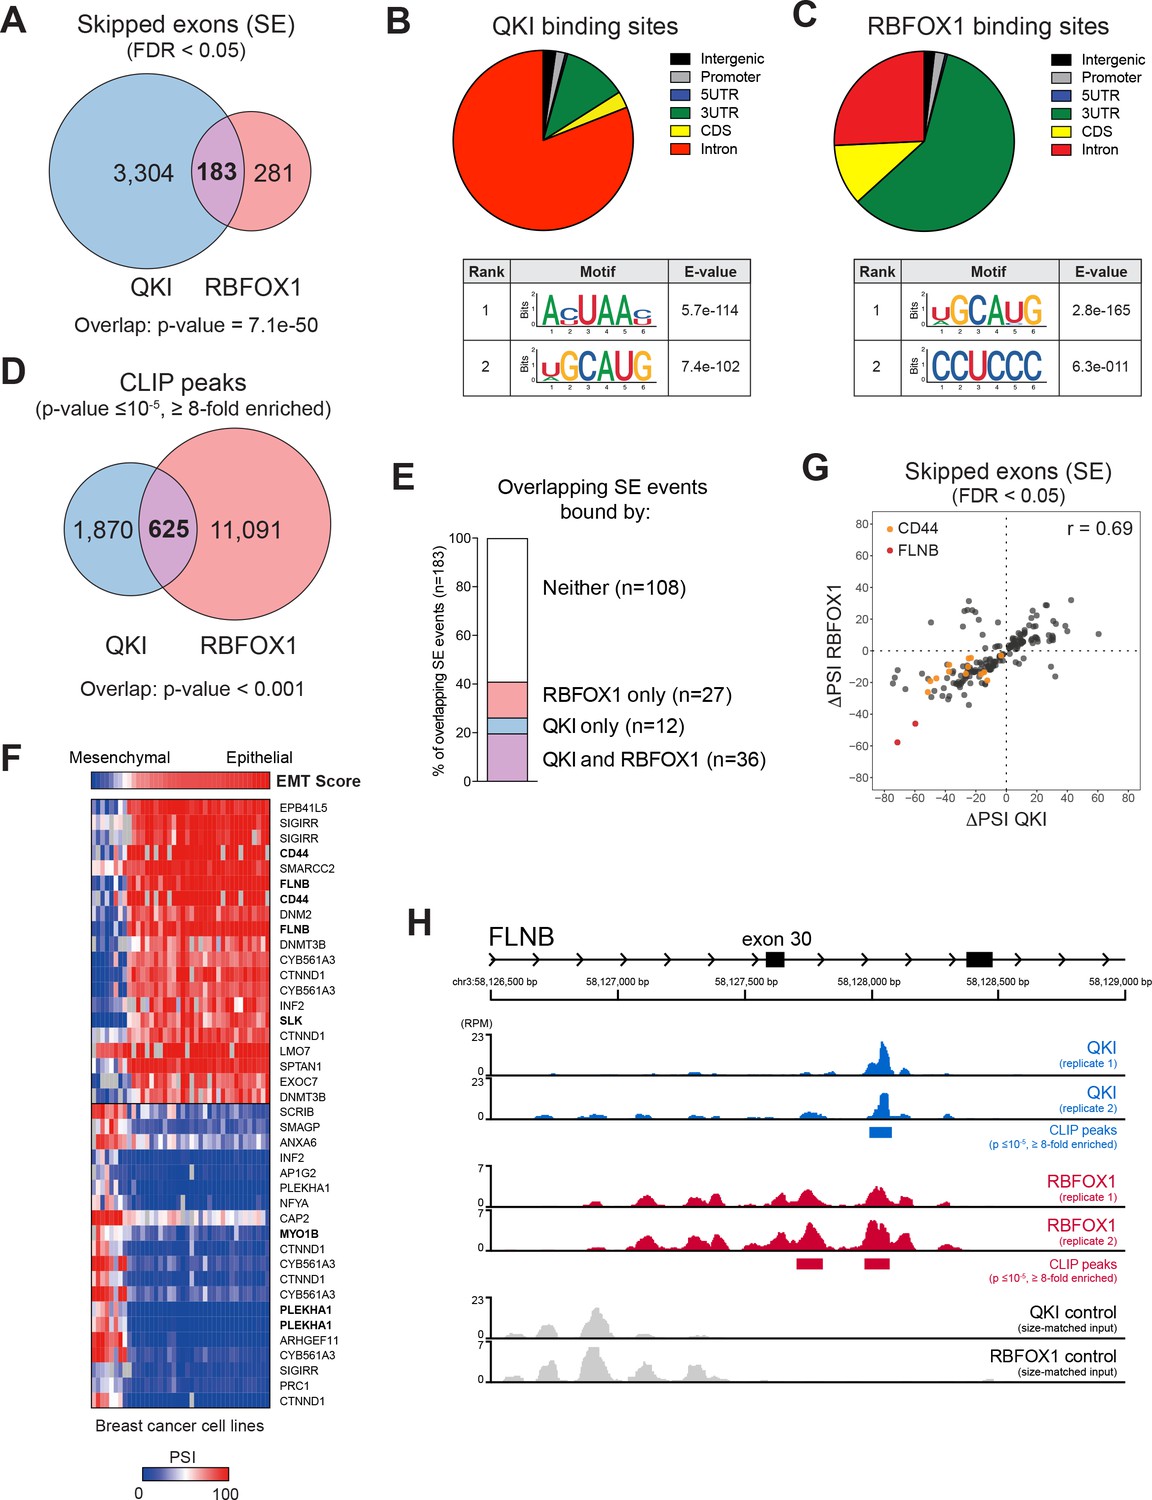 An Alternative Splicing Switch In Flnb Promotes The Mesenchymal Cell State In Human Breast Cancer Elife